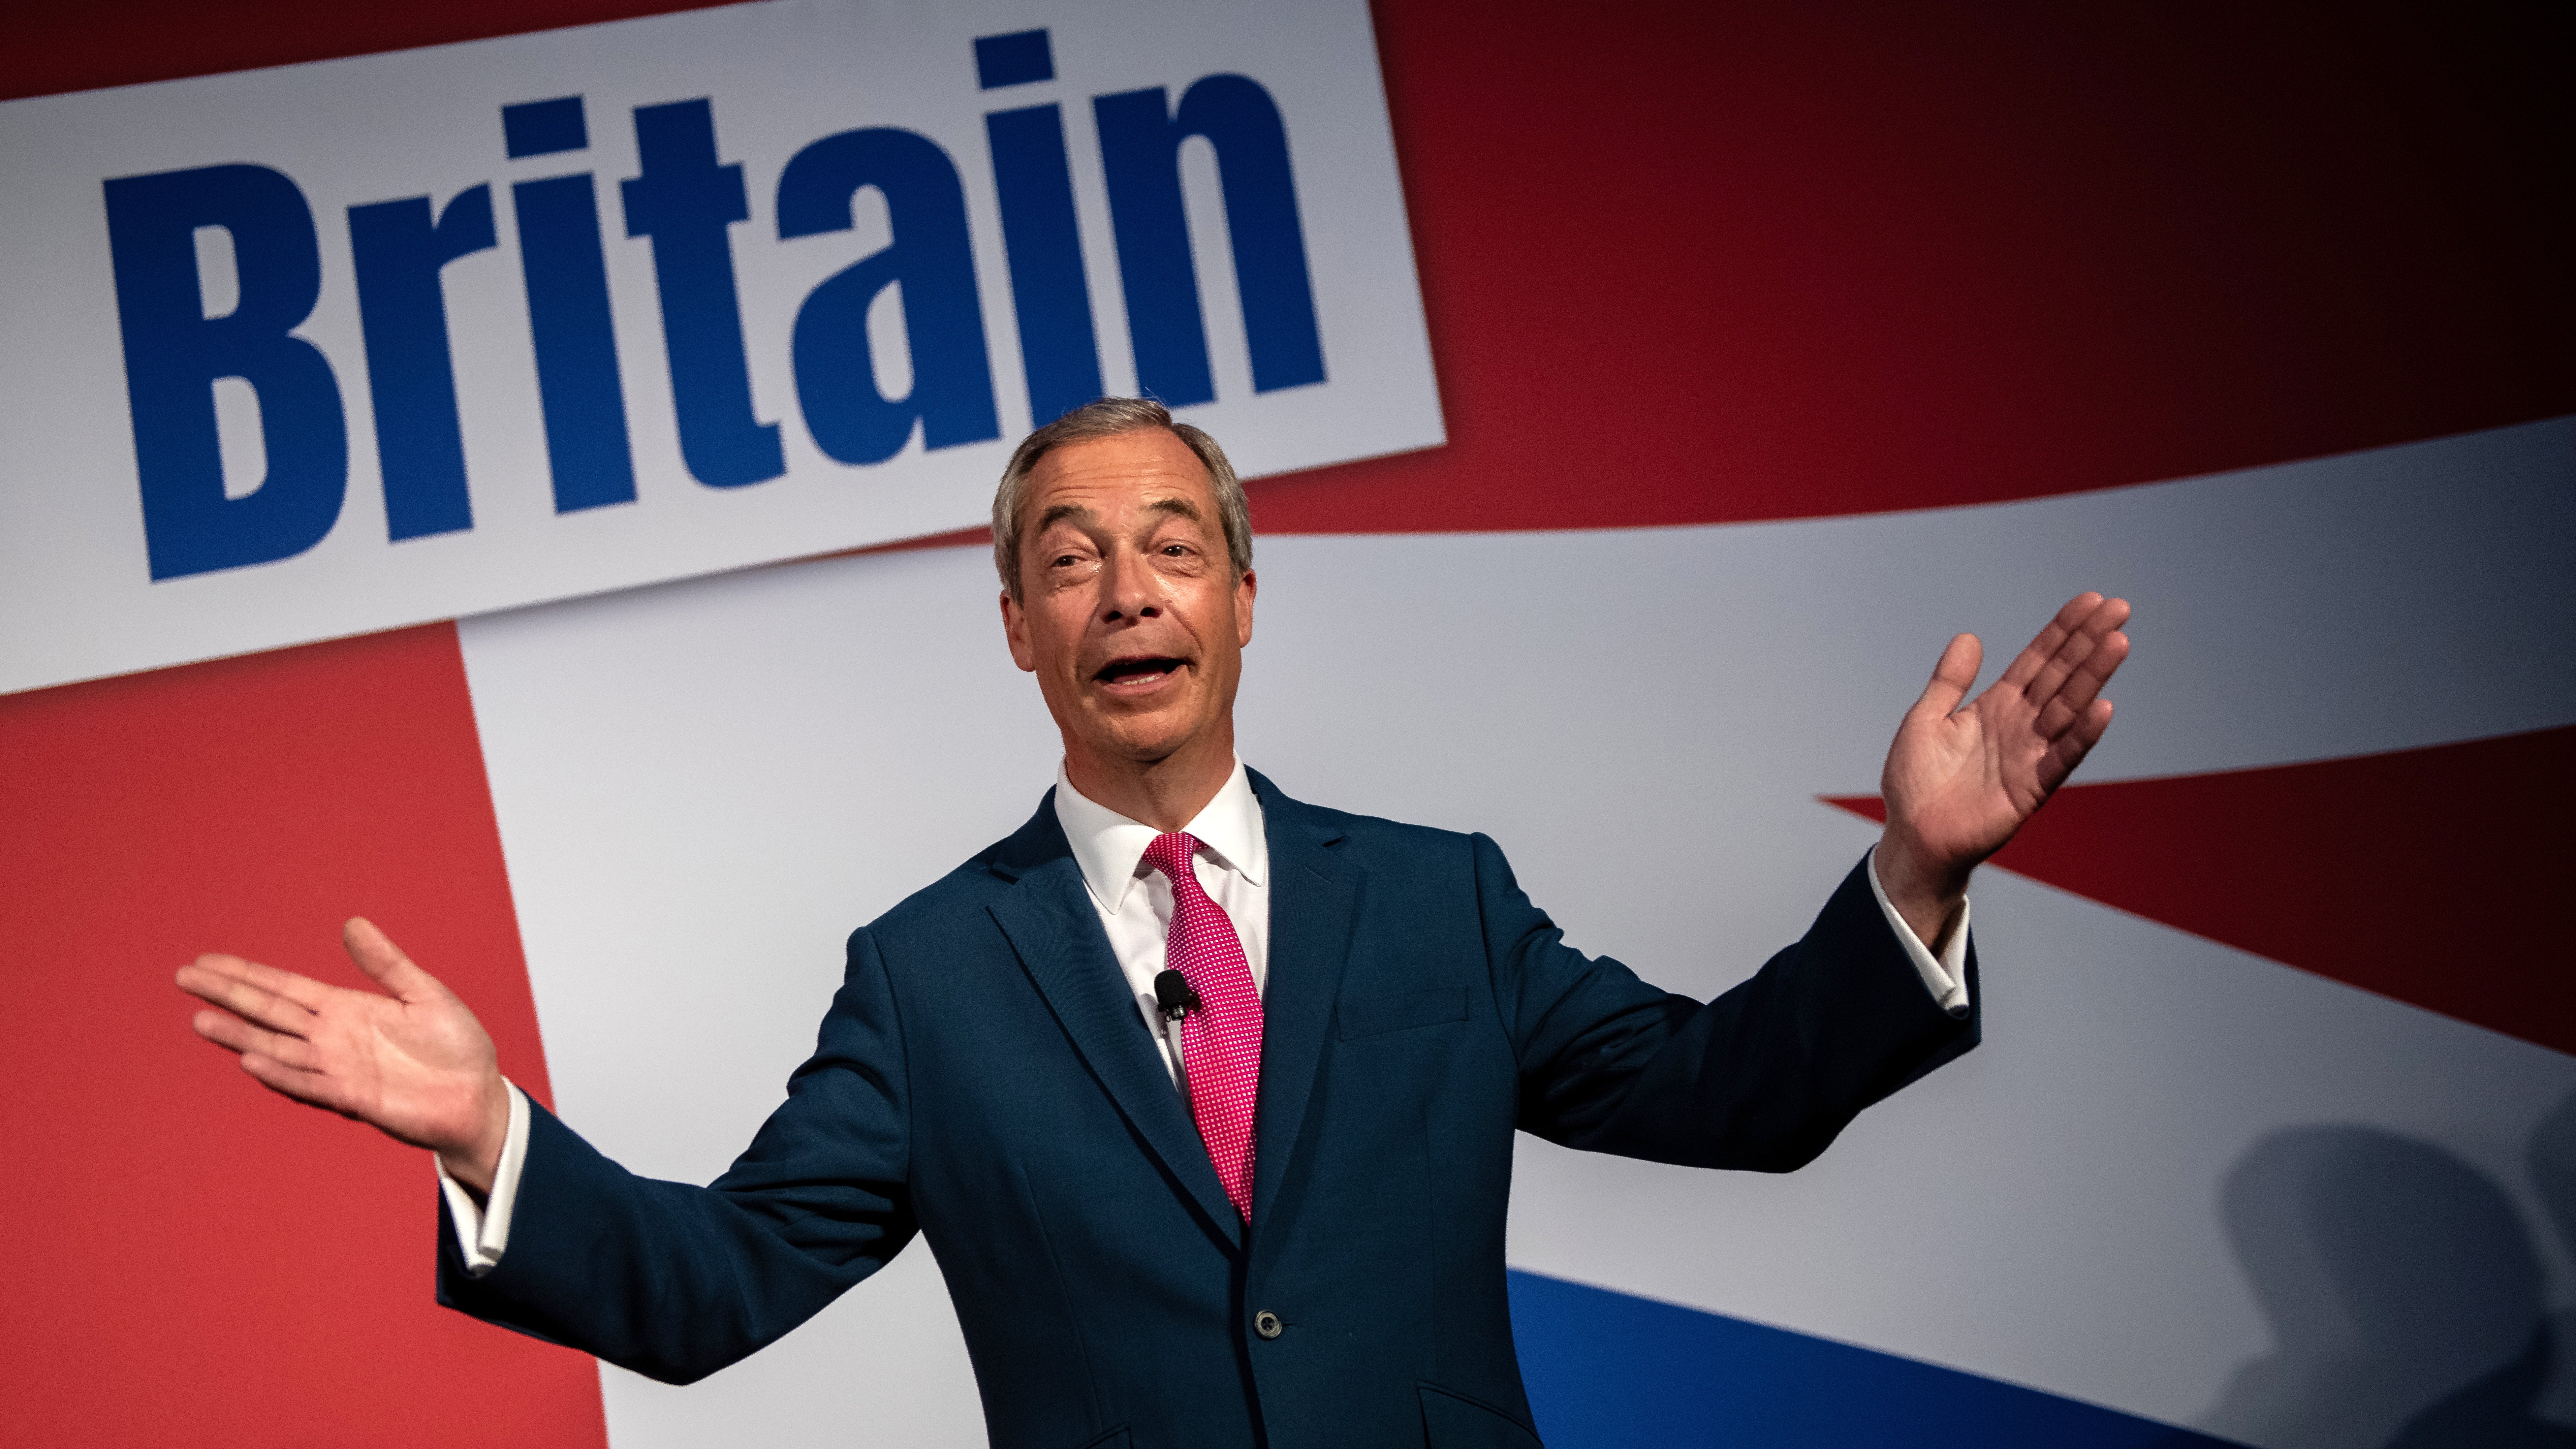 If he sees his future in the Tory party, Farage will become increasingly detached from Reform UK, just as he once did with Ukip